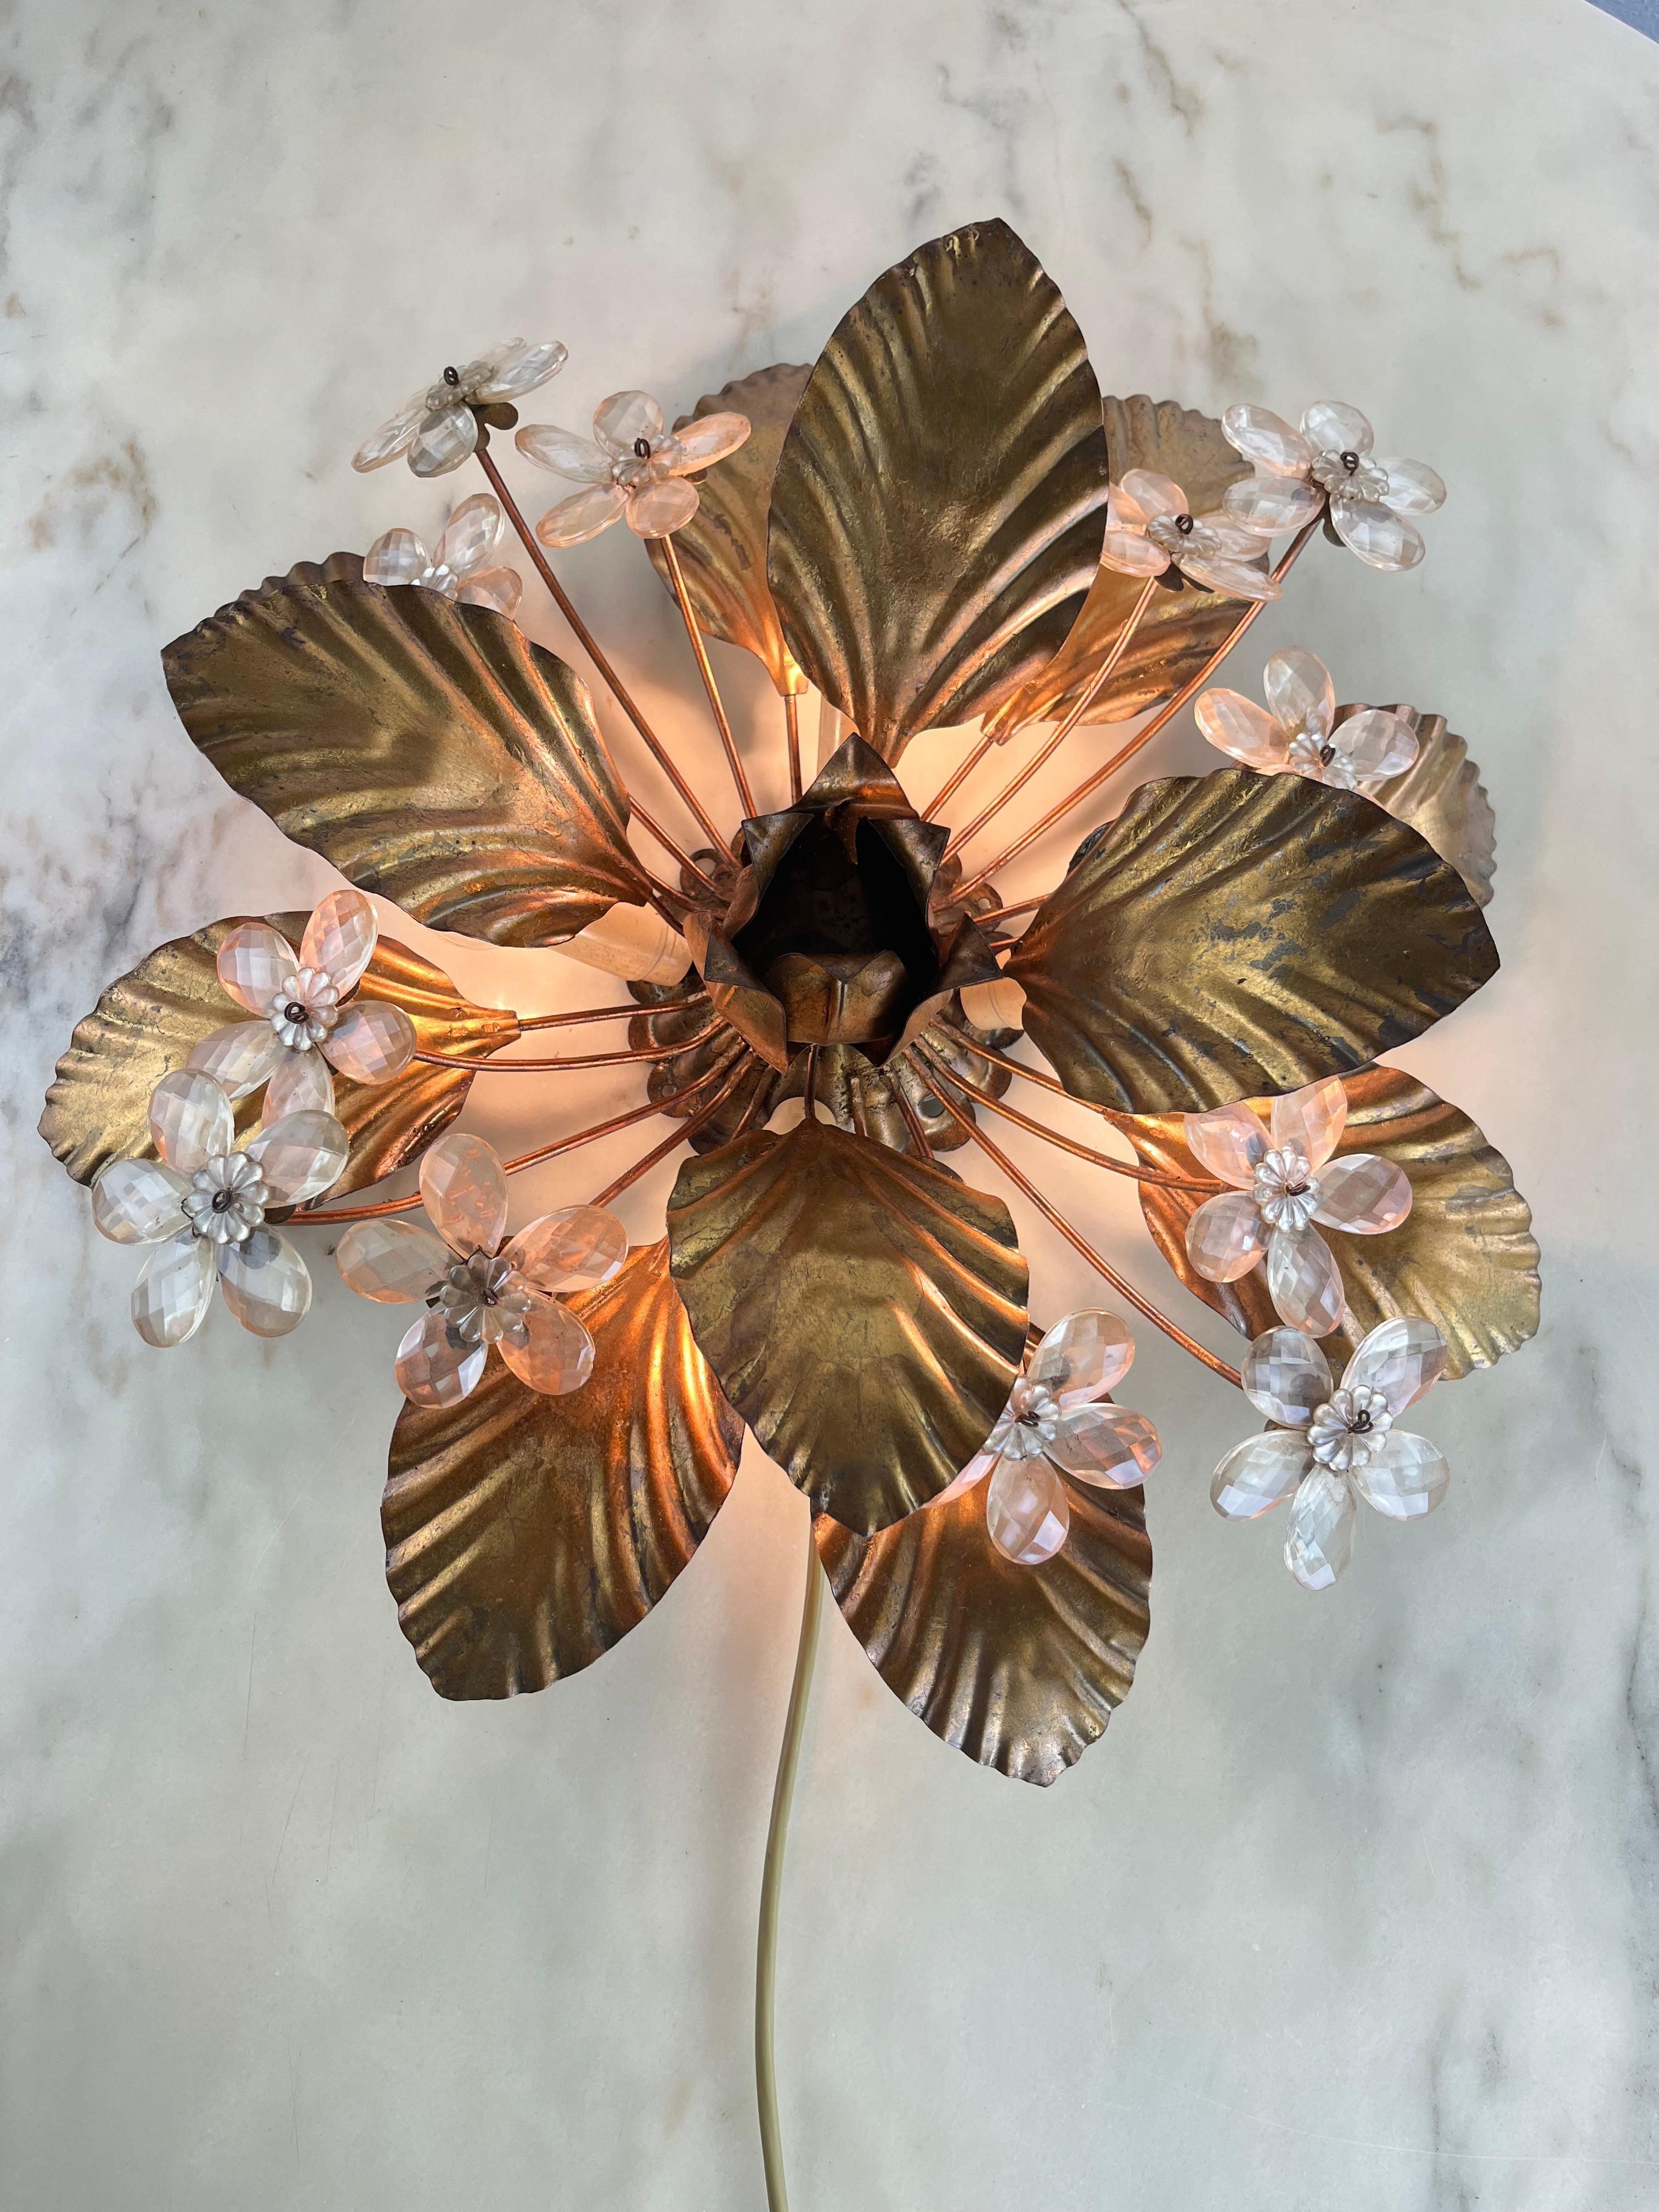 4-light Maison Baguès mid-century crystal flower ceiling lights.
Intact, metal and brass structure, E14 lamps.
Excellent condition, small signs of aging.

Maison Baguès

Born in 1840, the famous Maison Baguès was founded in the center of Paris. He